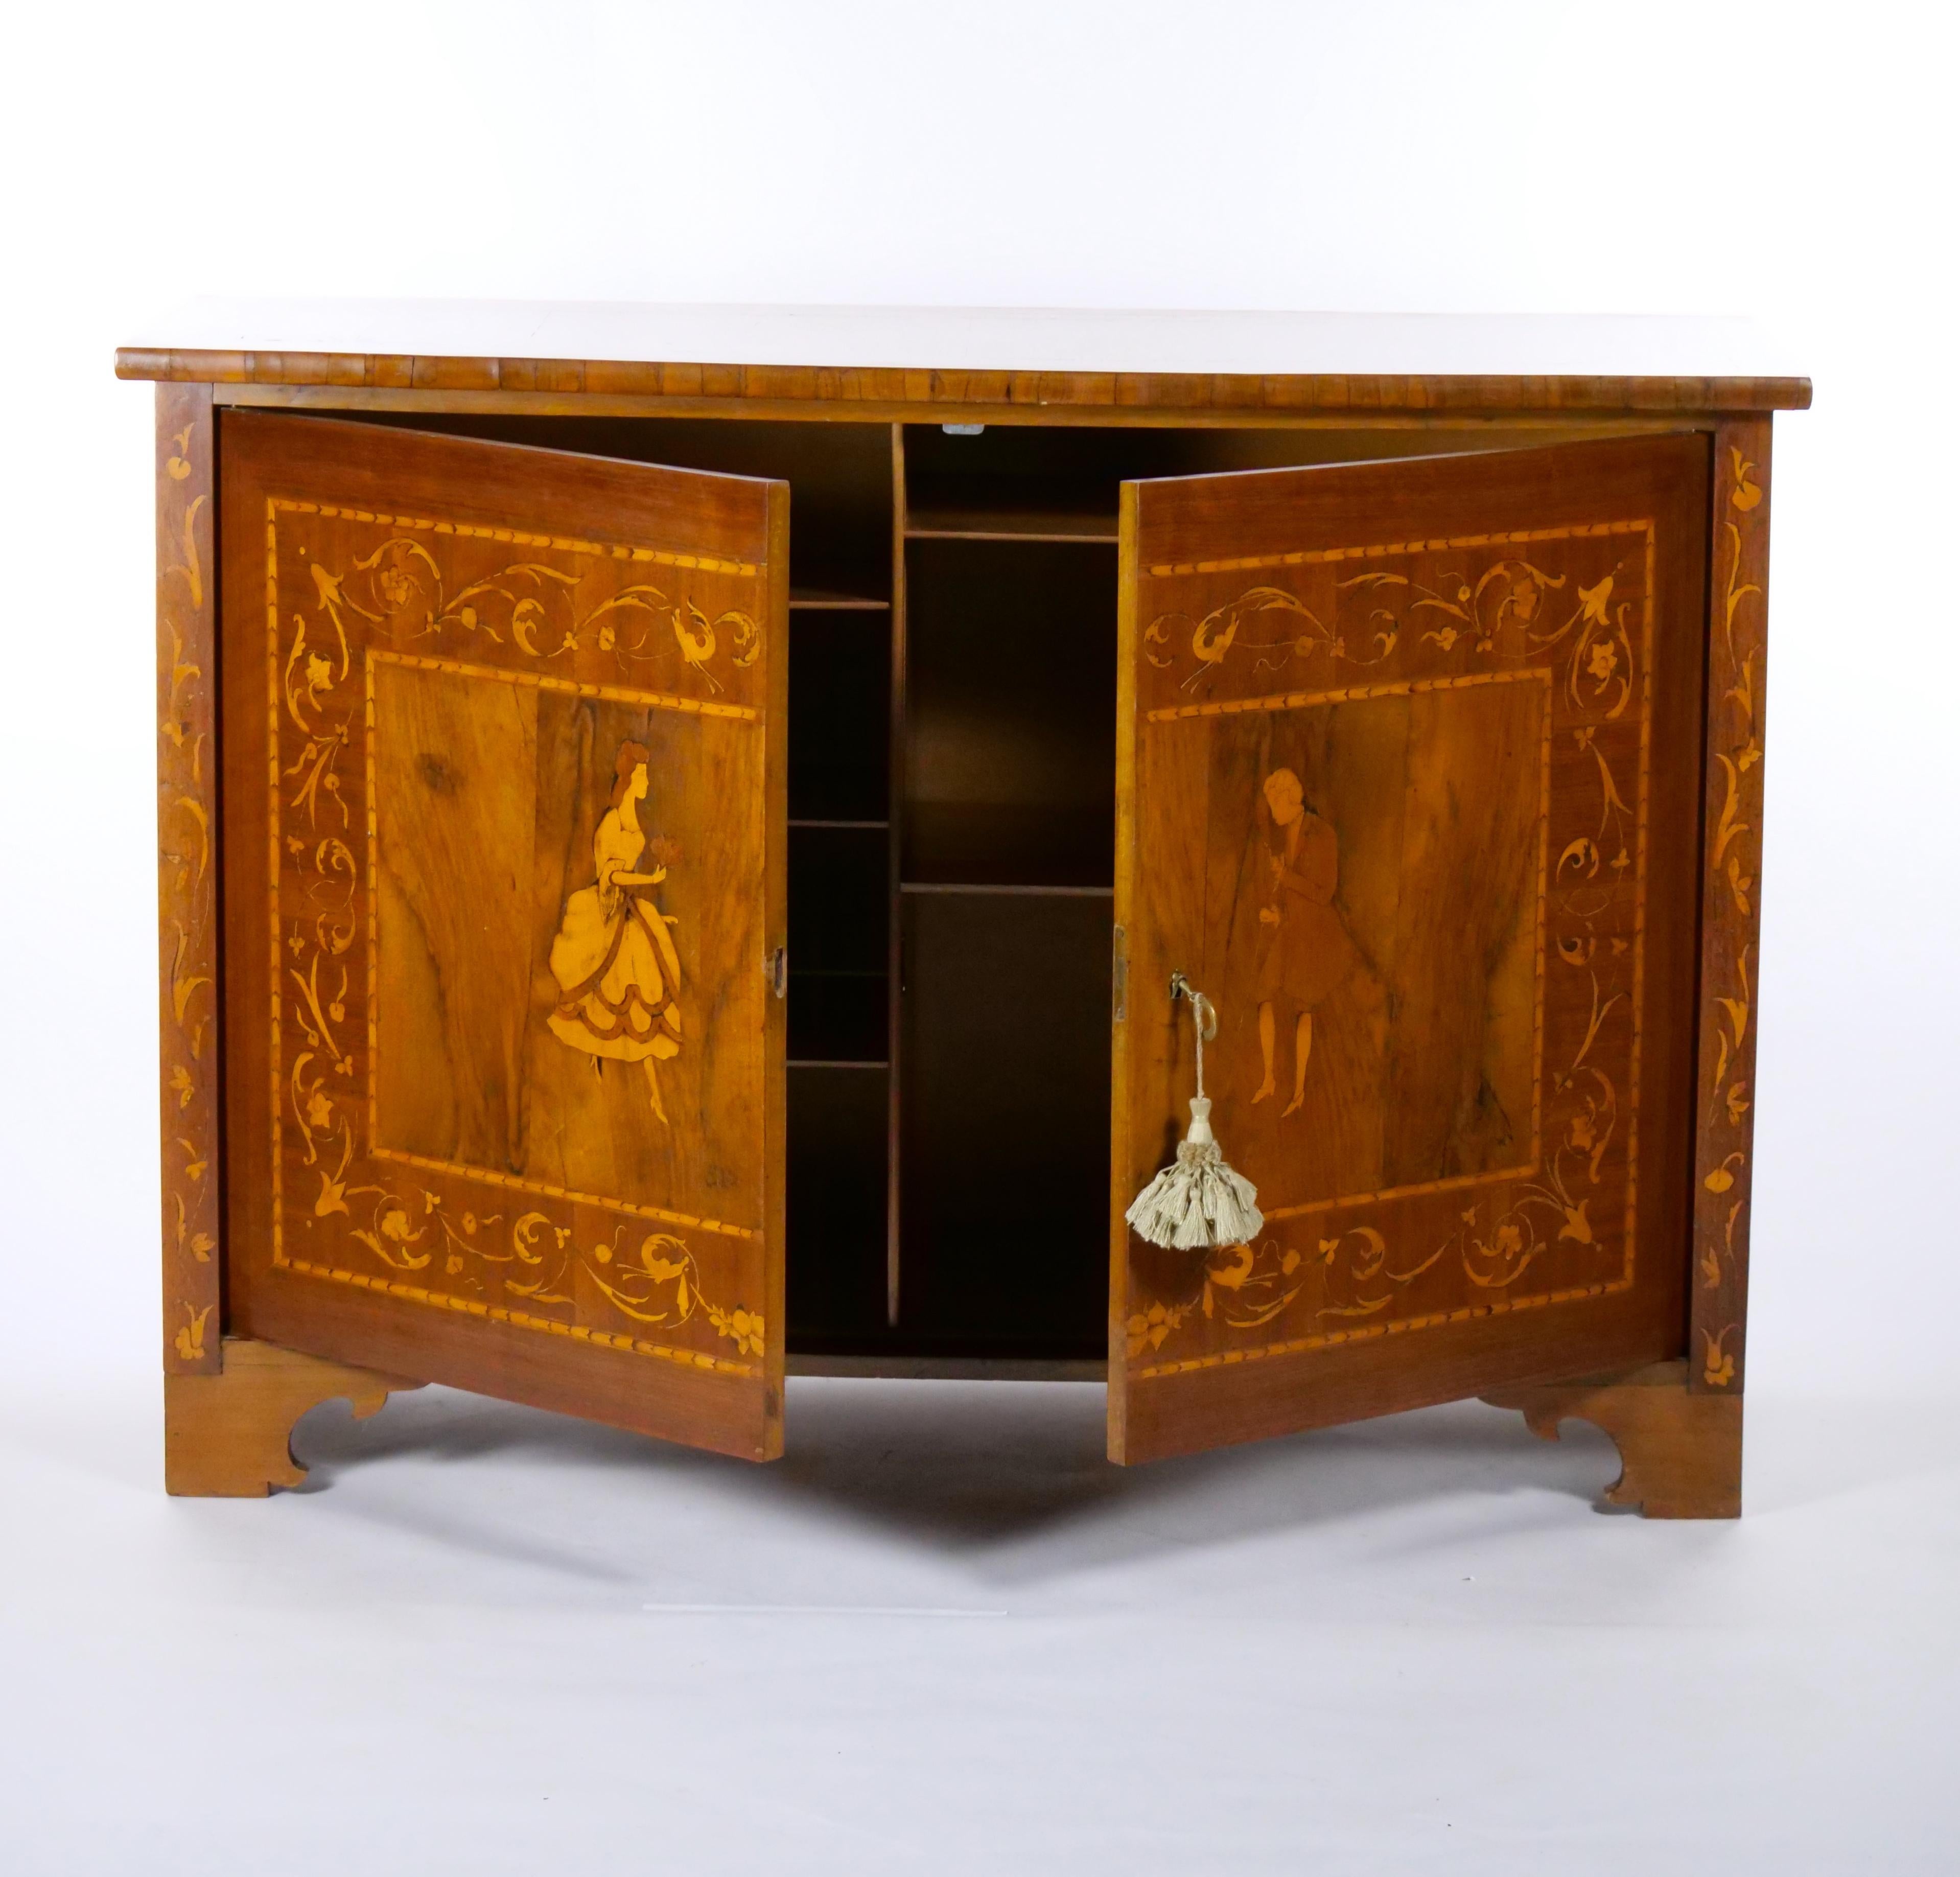 Beautifully crafted French marquetry wood sideboard / server cabinet with double inlaid front door featuring individuals in period attire. The sides of the credenza features beautiful inlaid decoration wood pattern all raised on short hand carved